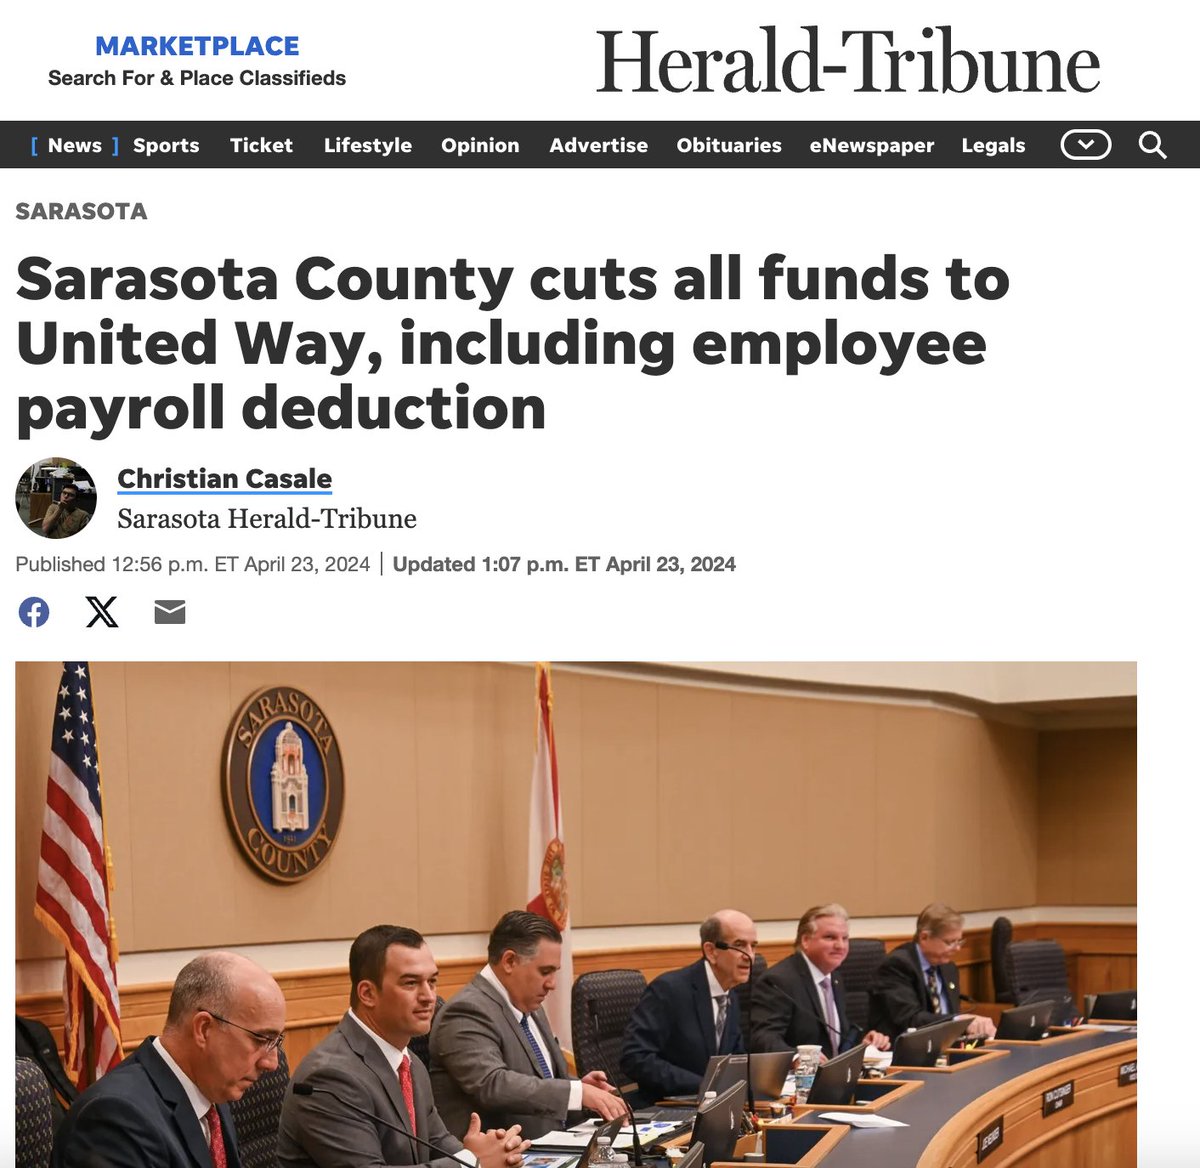 Anti-abortion extremism at it again, this time leading to Sarasota County cutting support to United Way because the 211 helpline lists Planned Parenthood as a resource. Just ridiculous and so very out-of-touch. Link: heraldtribune.com/story/news/loc…